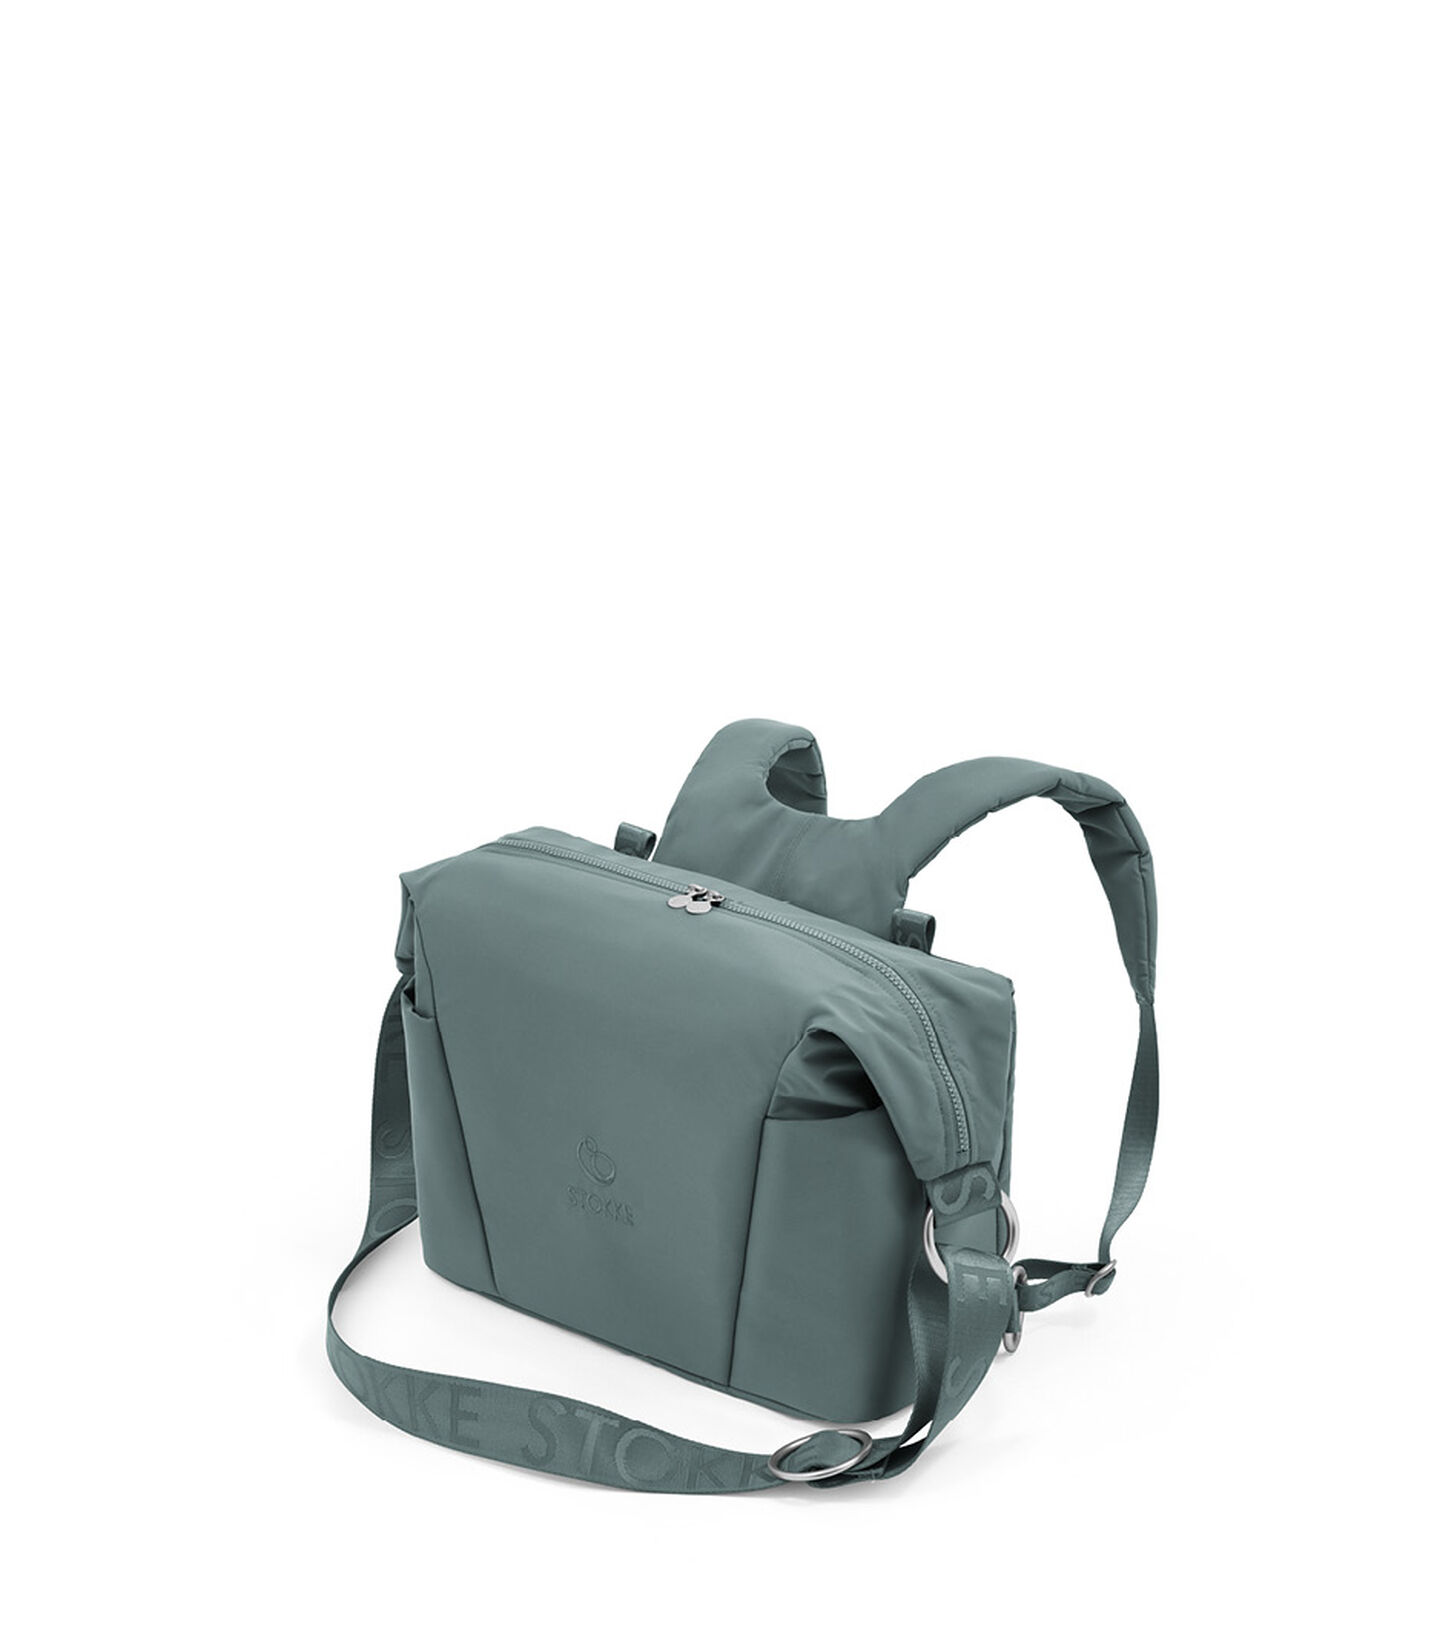 Stokke® Xplory® X Changing bag Cool Teal, Cool Teal, mainview view 1